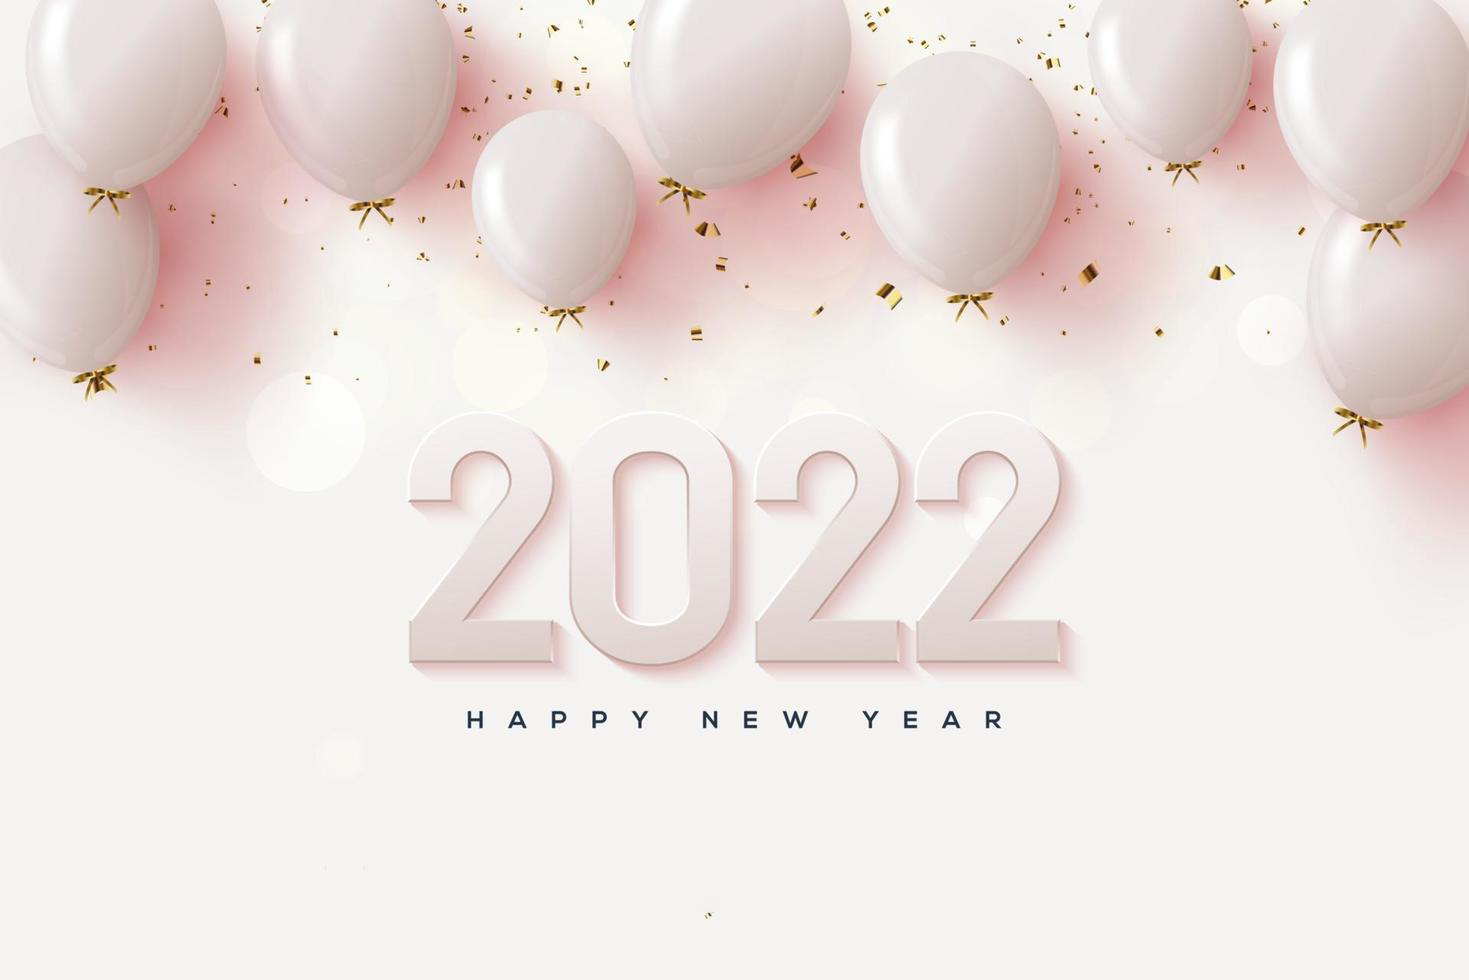  Happy New Year 2022: Wishes, Images 1